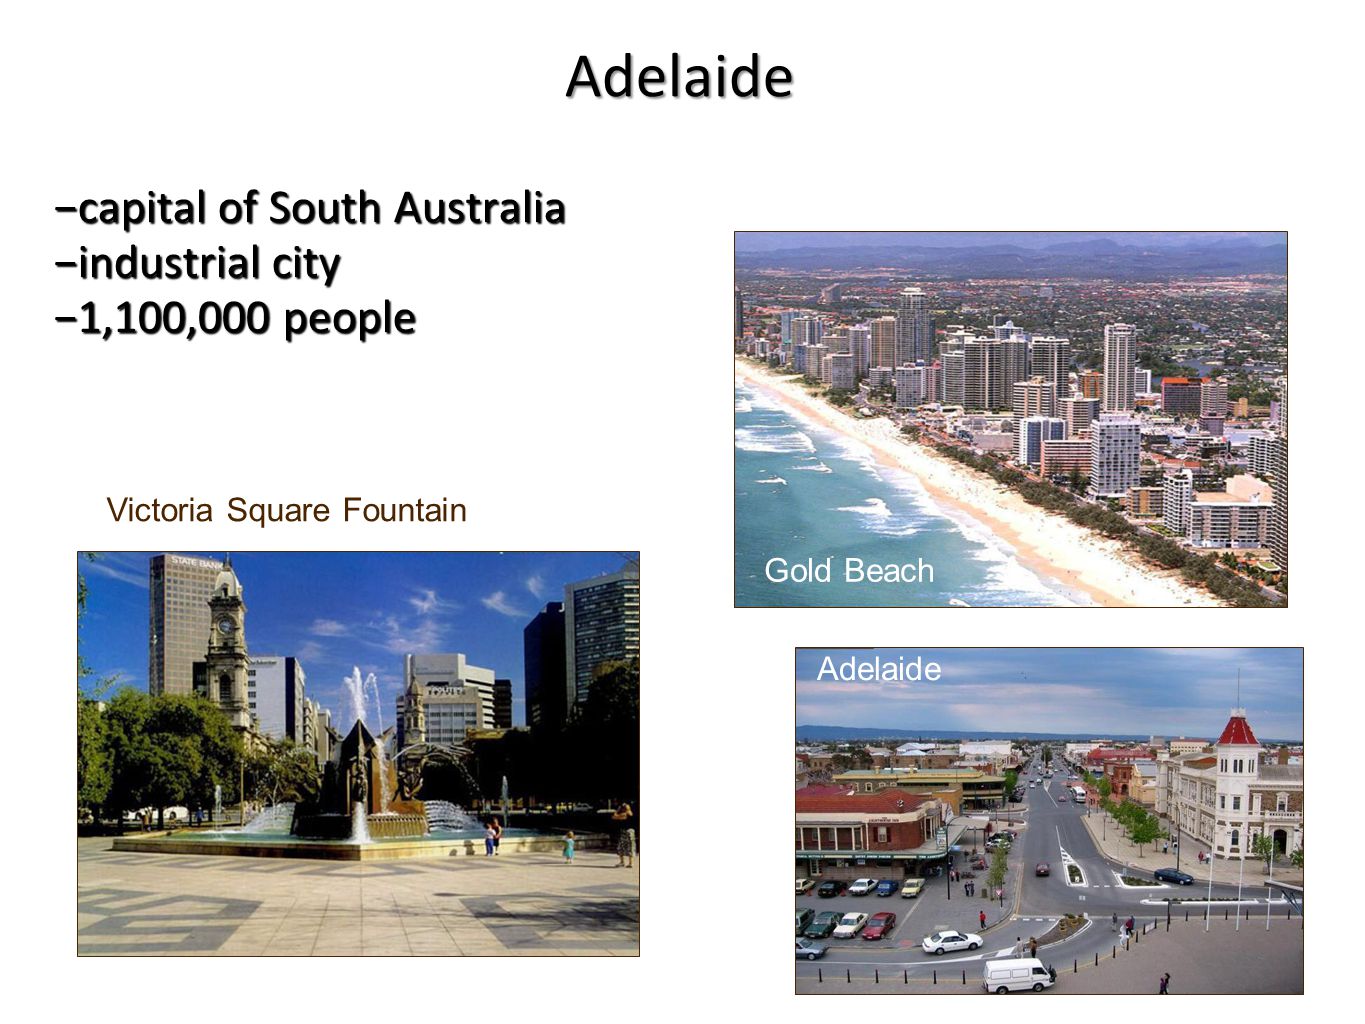 −capital of South Australia −industrial city −1,100,000 people Victoria Square Fountain Gold Beach Adelaide Adelaide